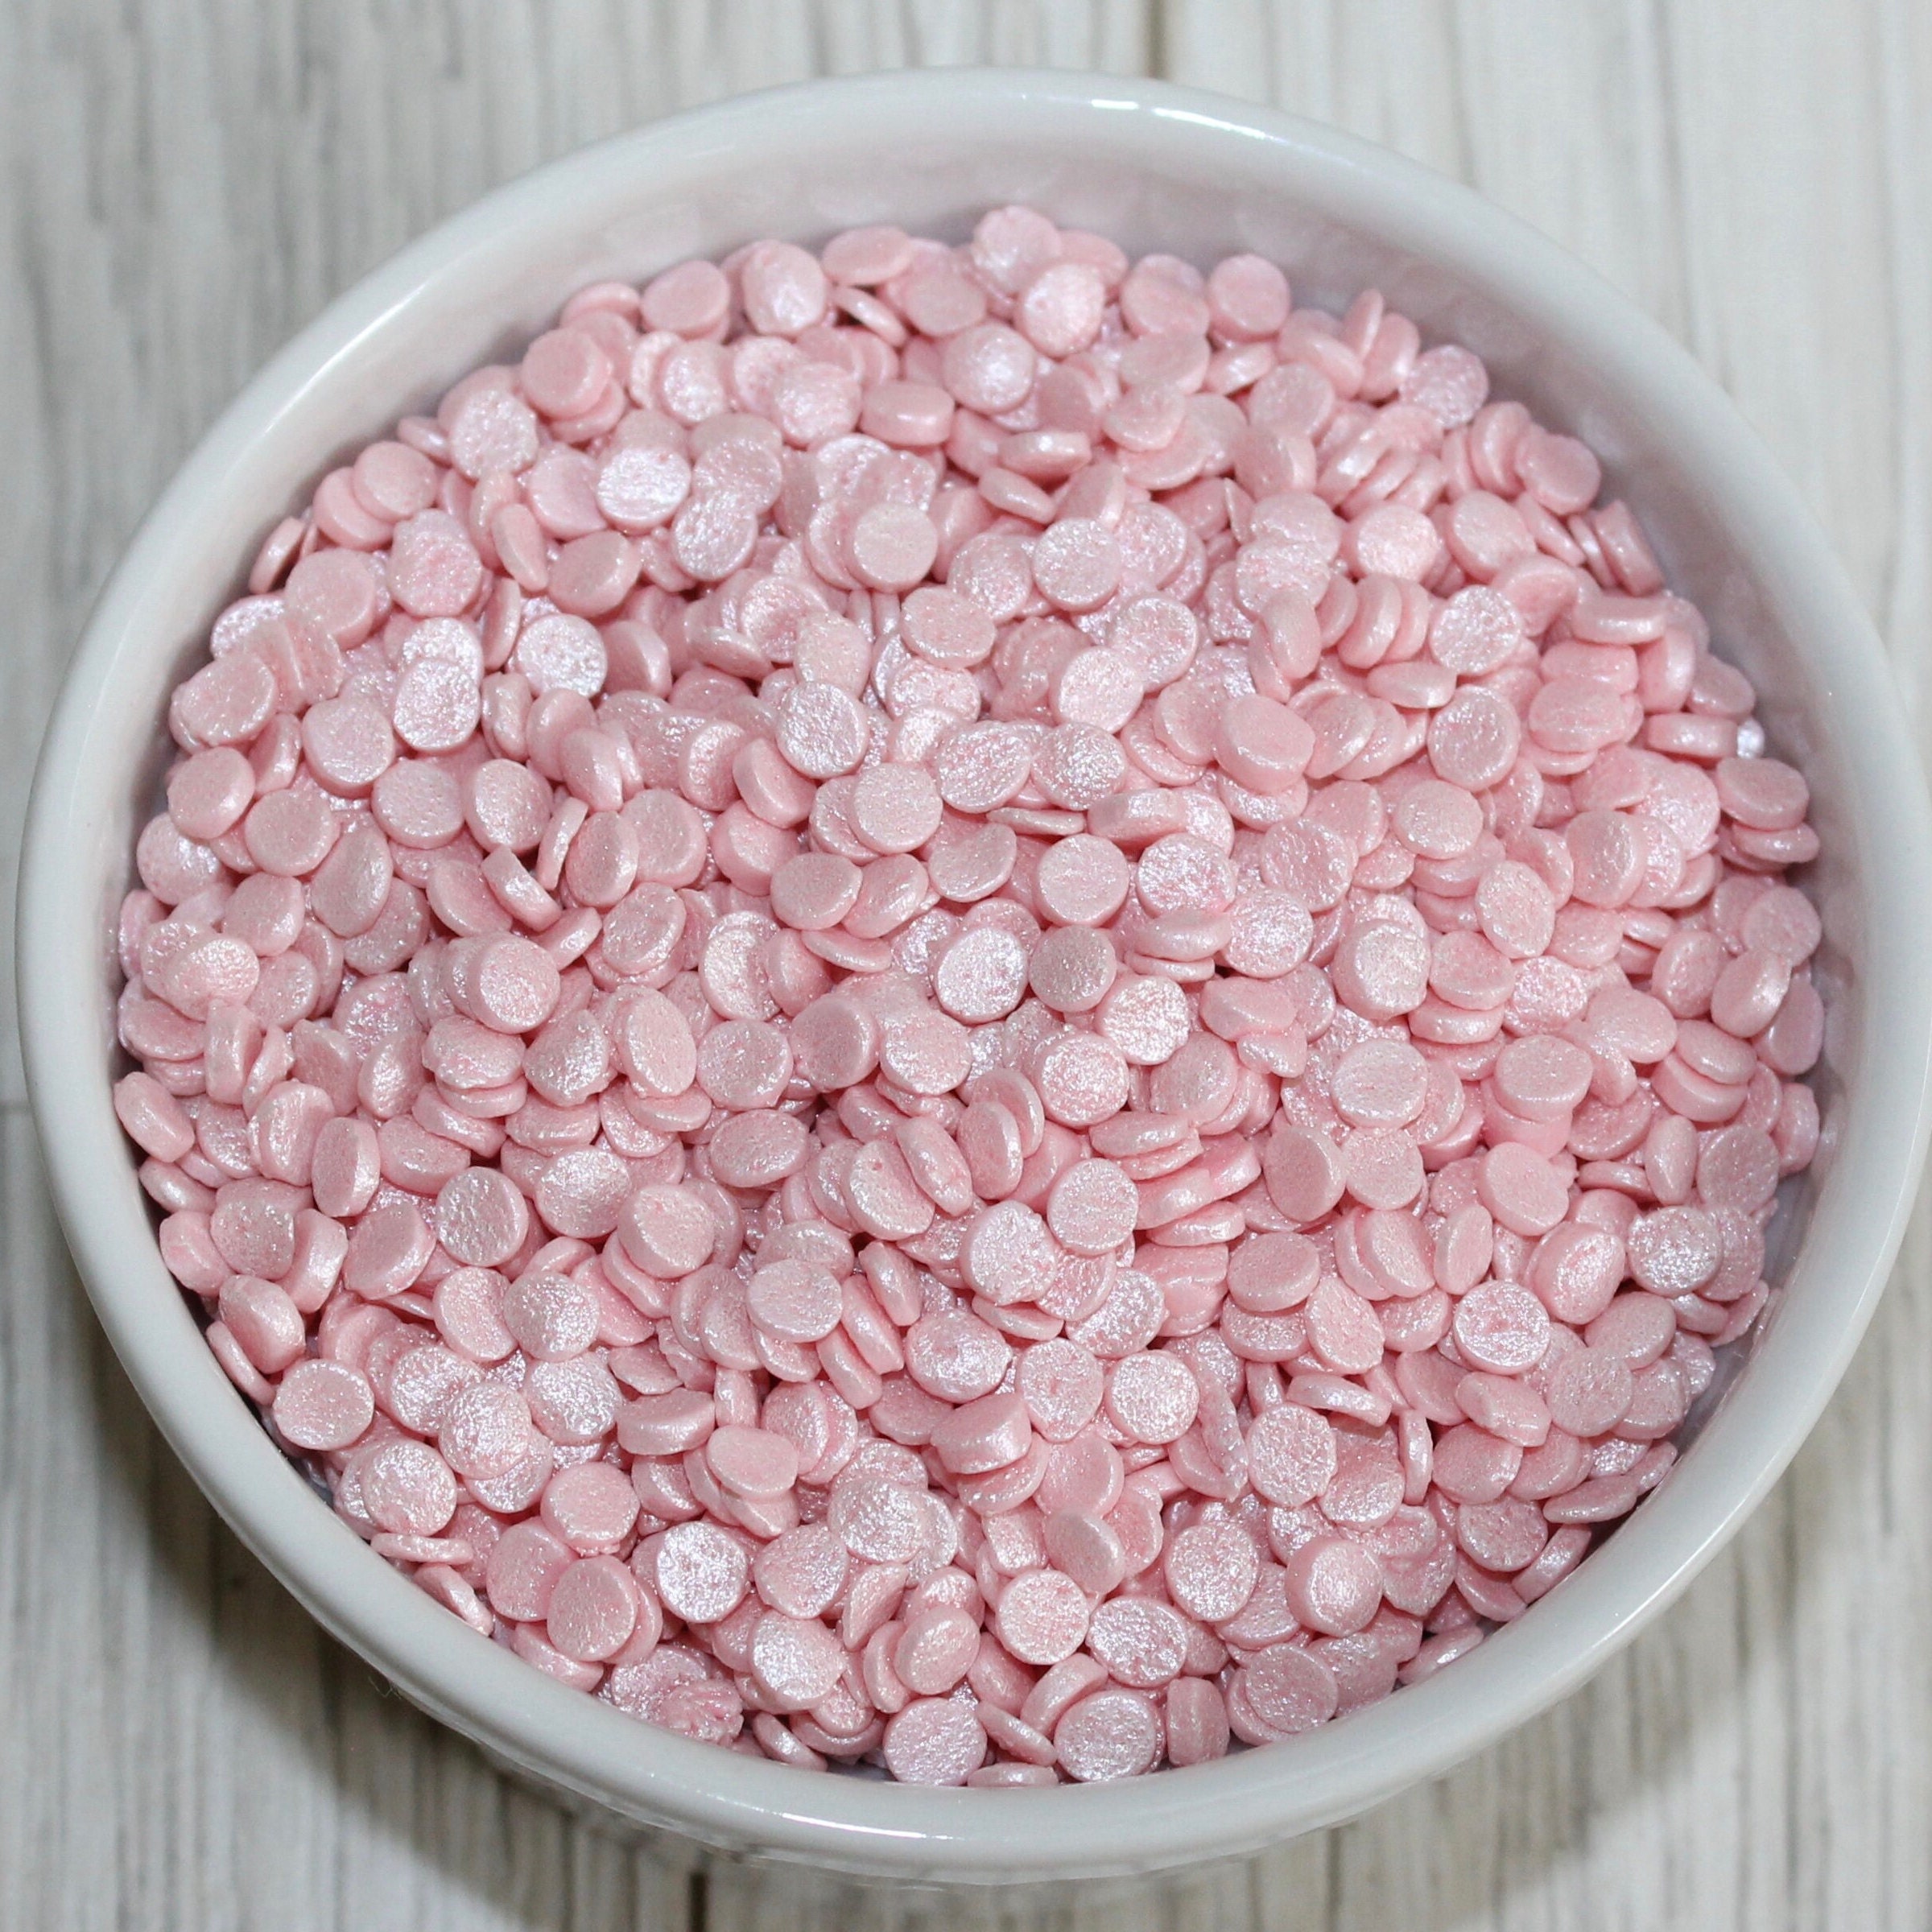 Pretty Princess Pink Pearlized Dainty Beads Topping Sprinkles